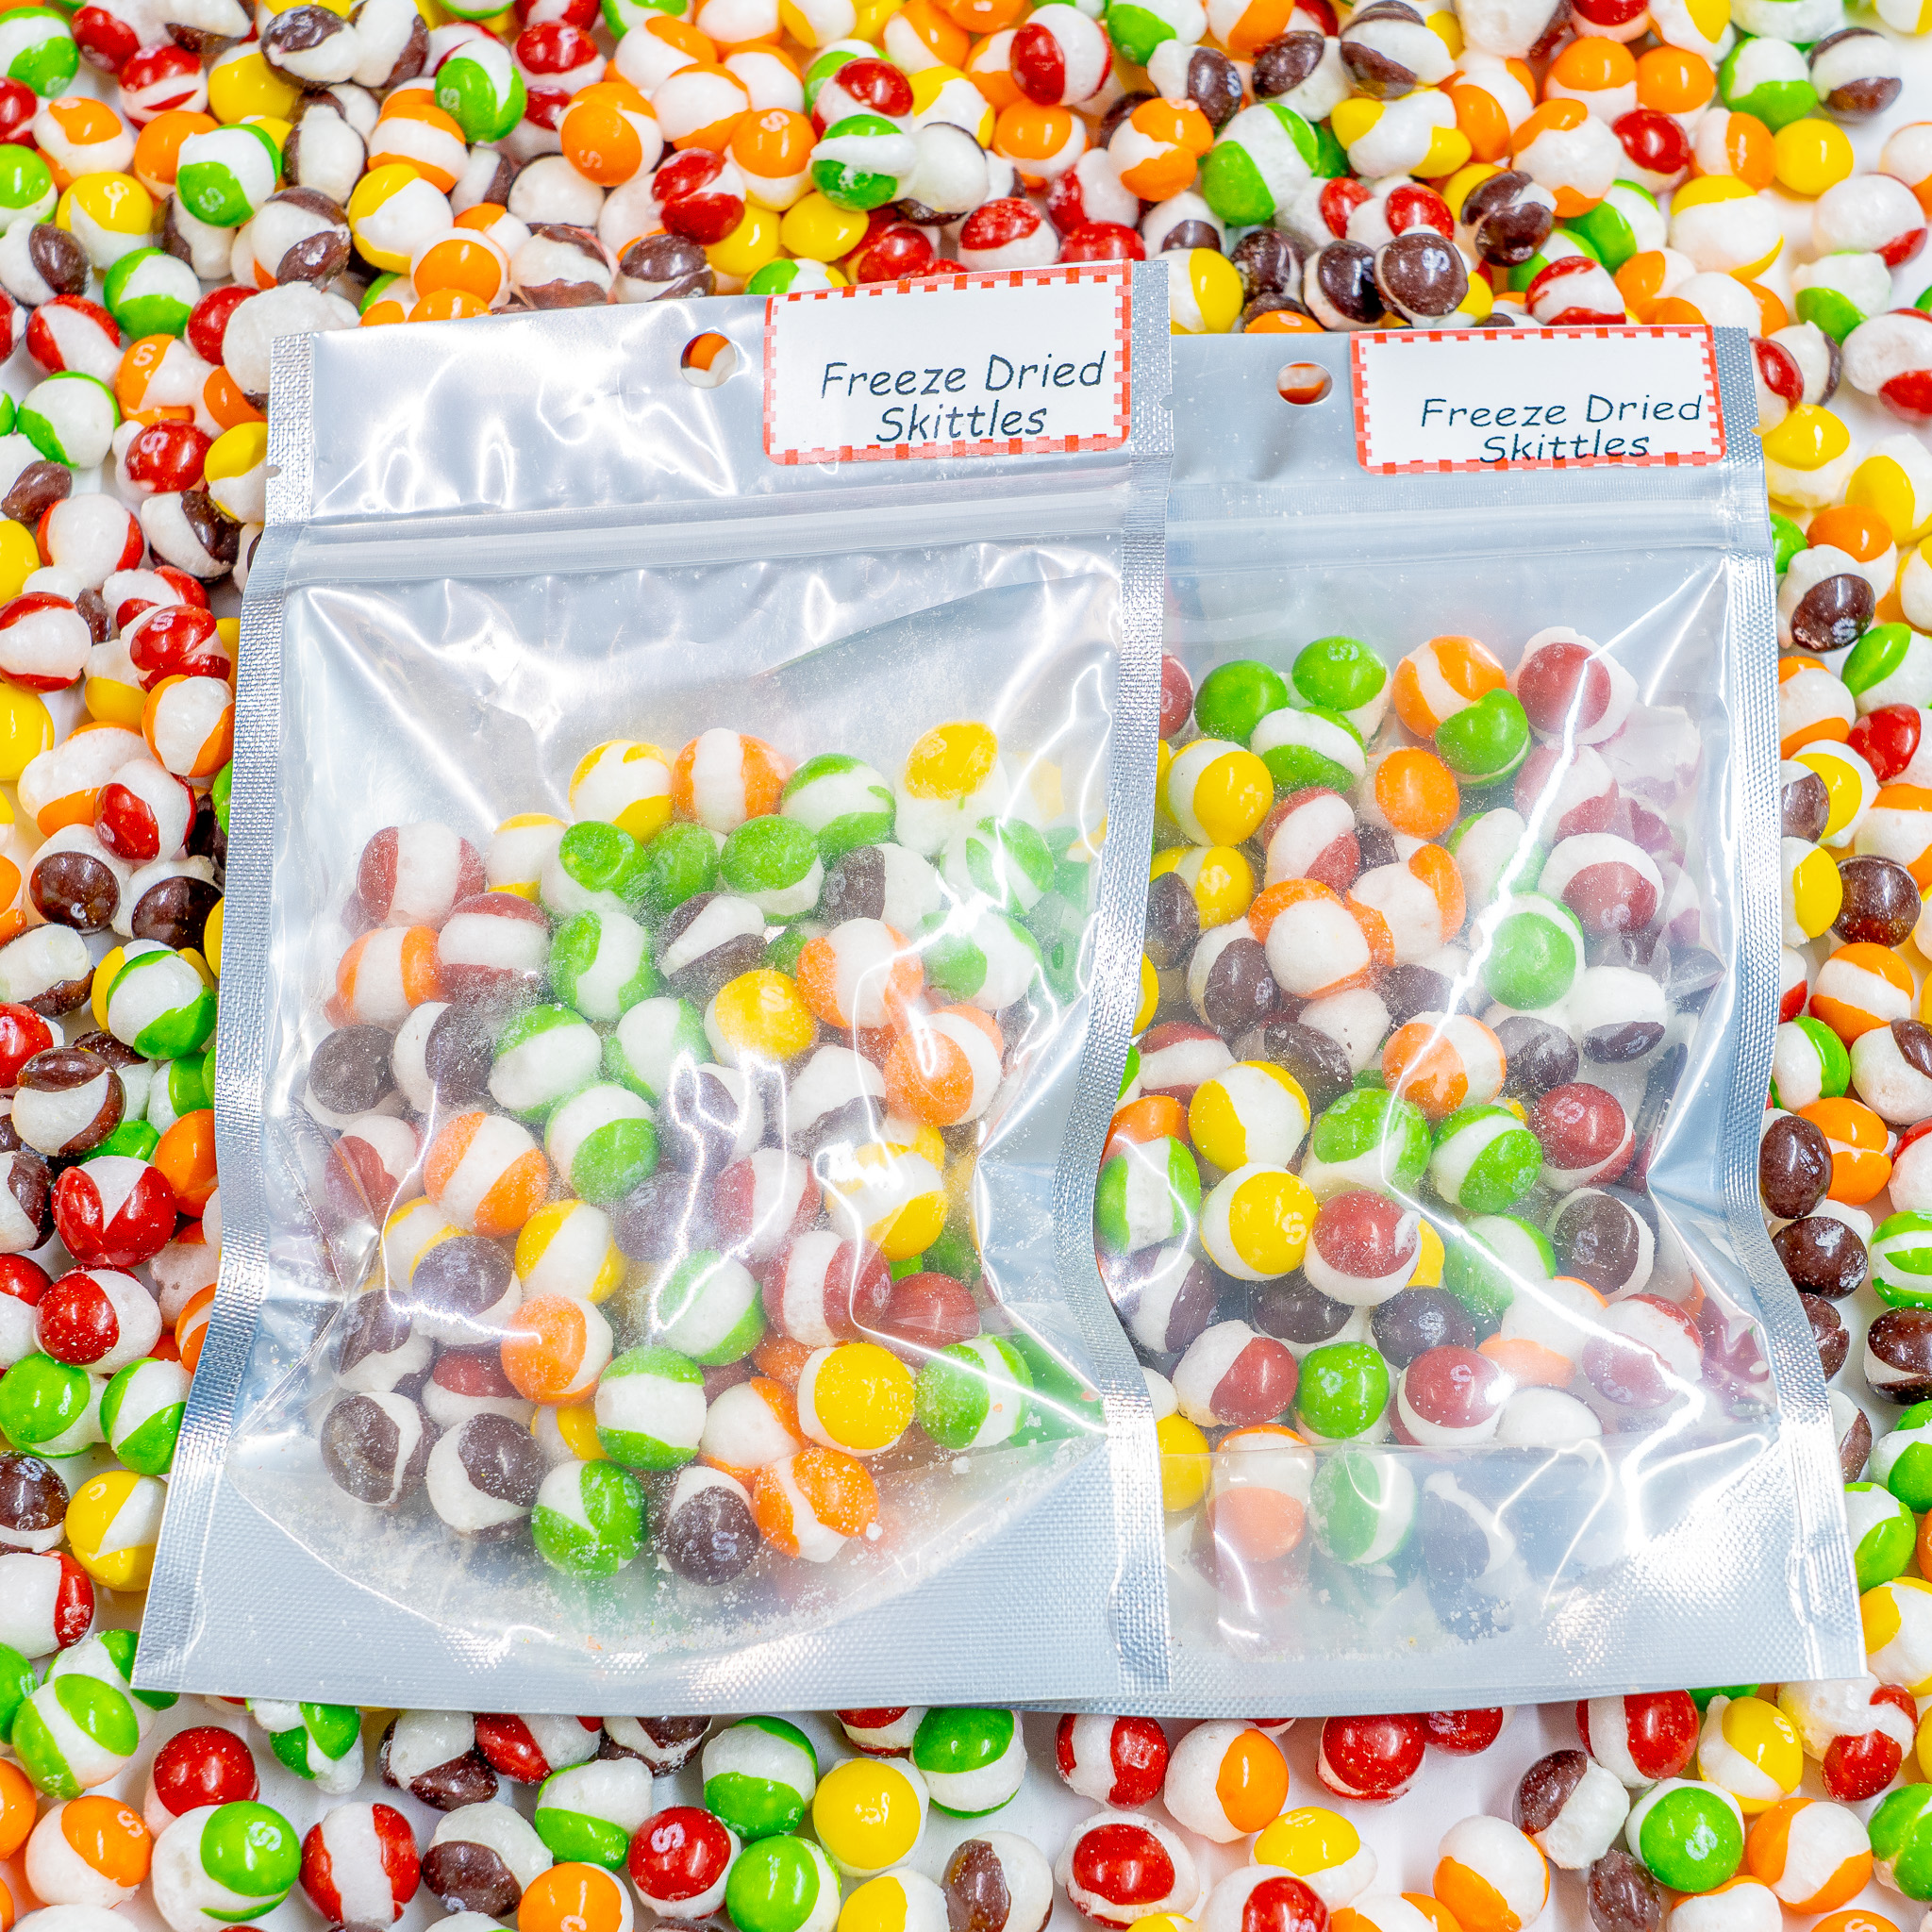 2 2.5 oz. bags of freeze dried skittles on top of an assortment of freeze dried skittles out of bag